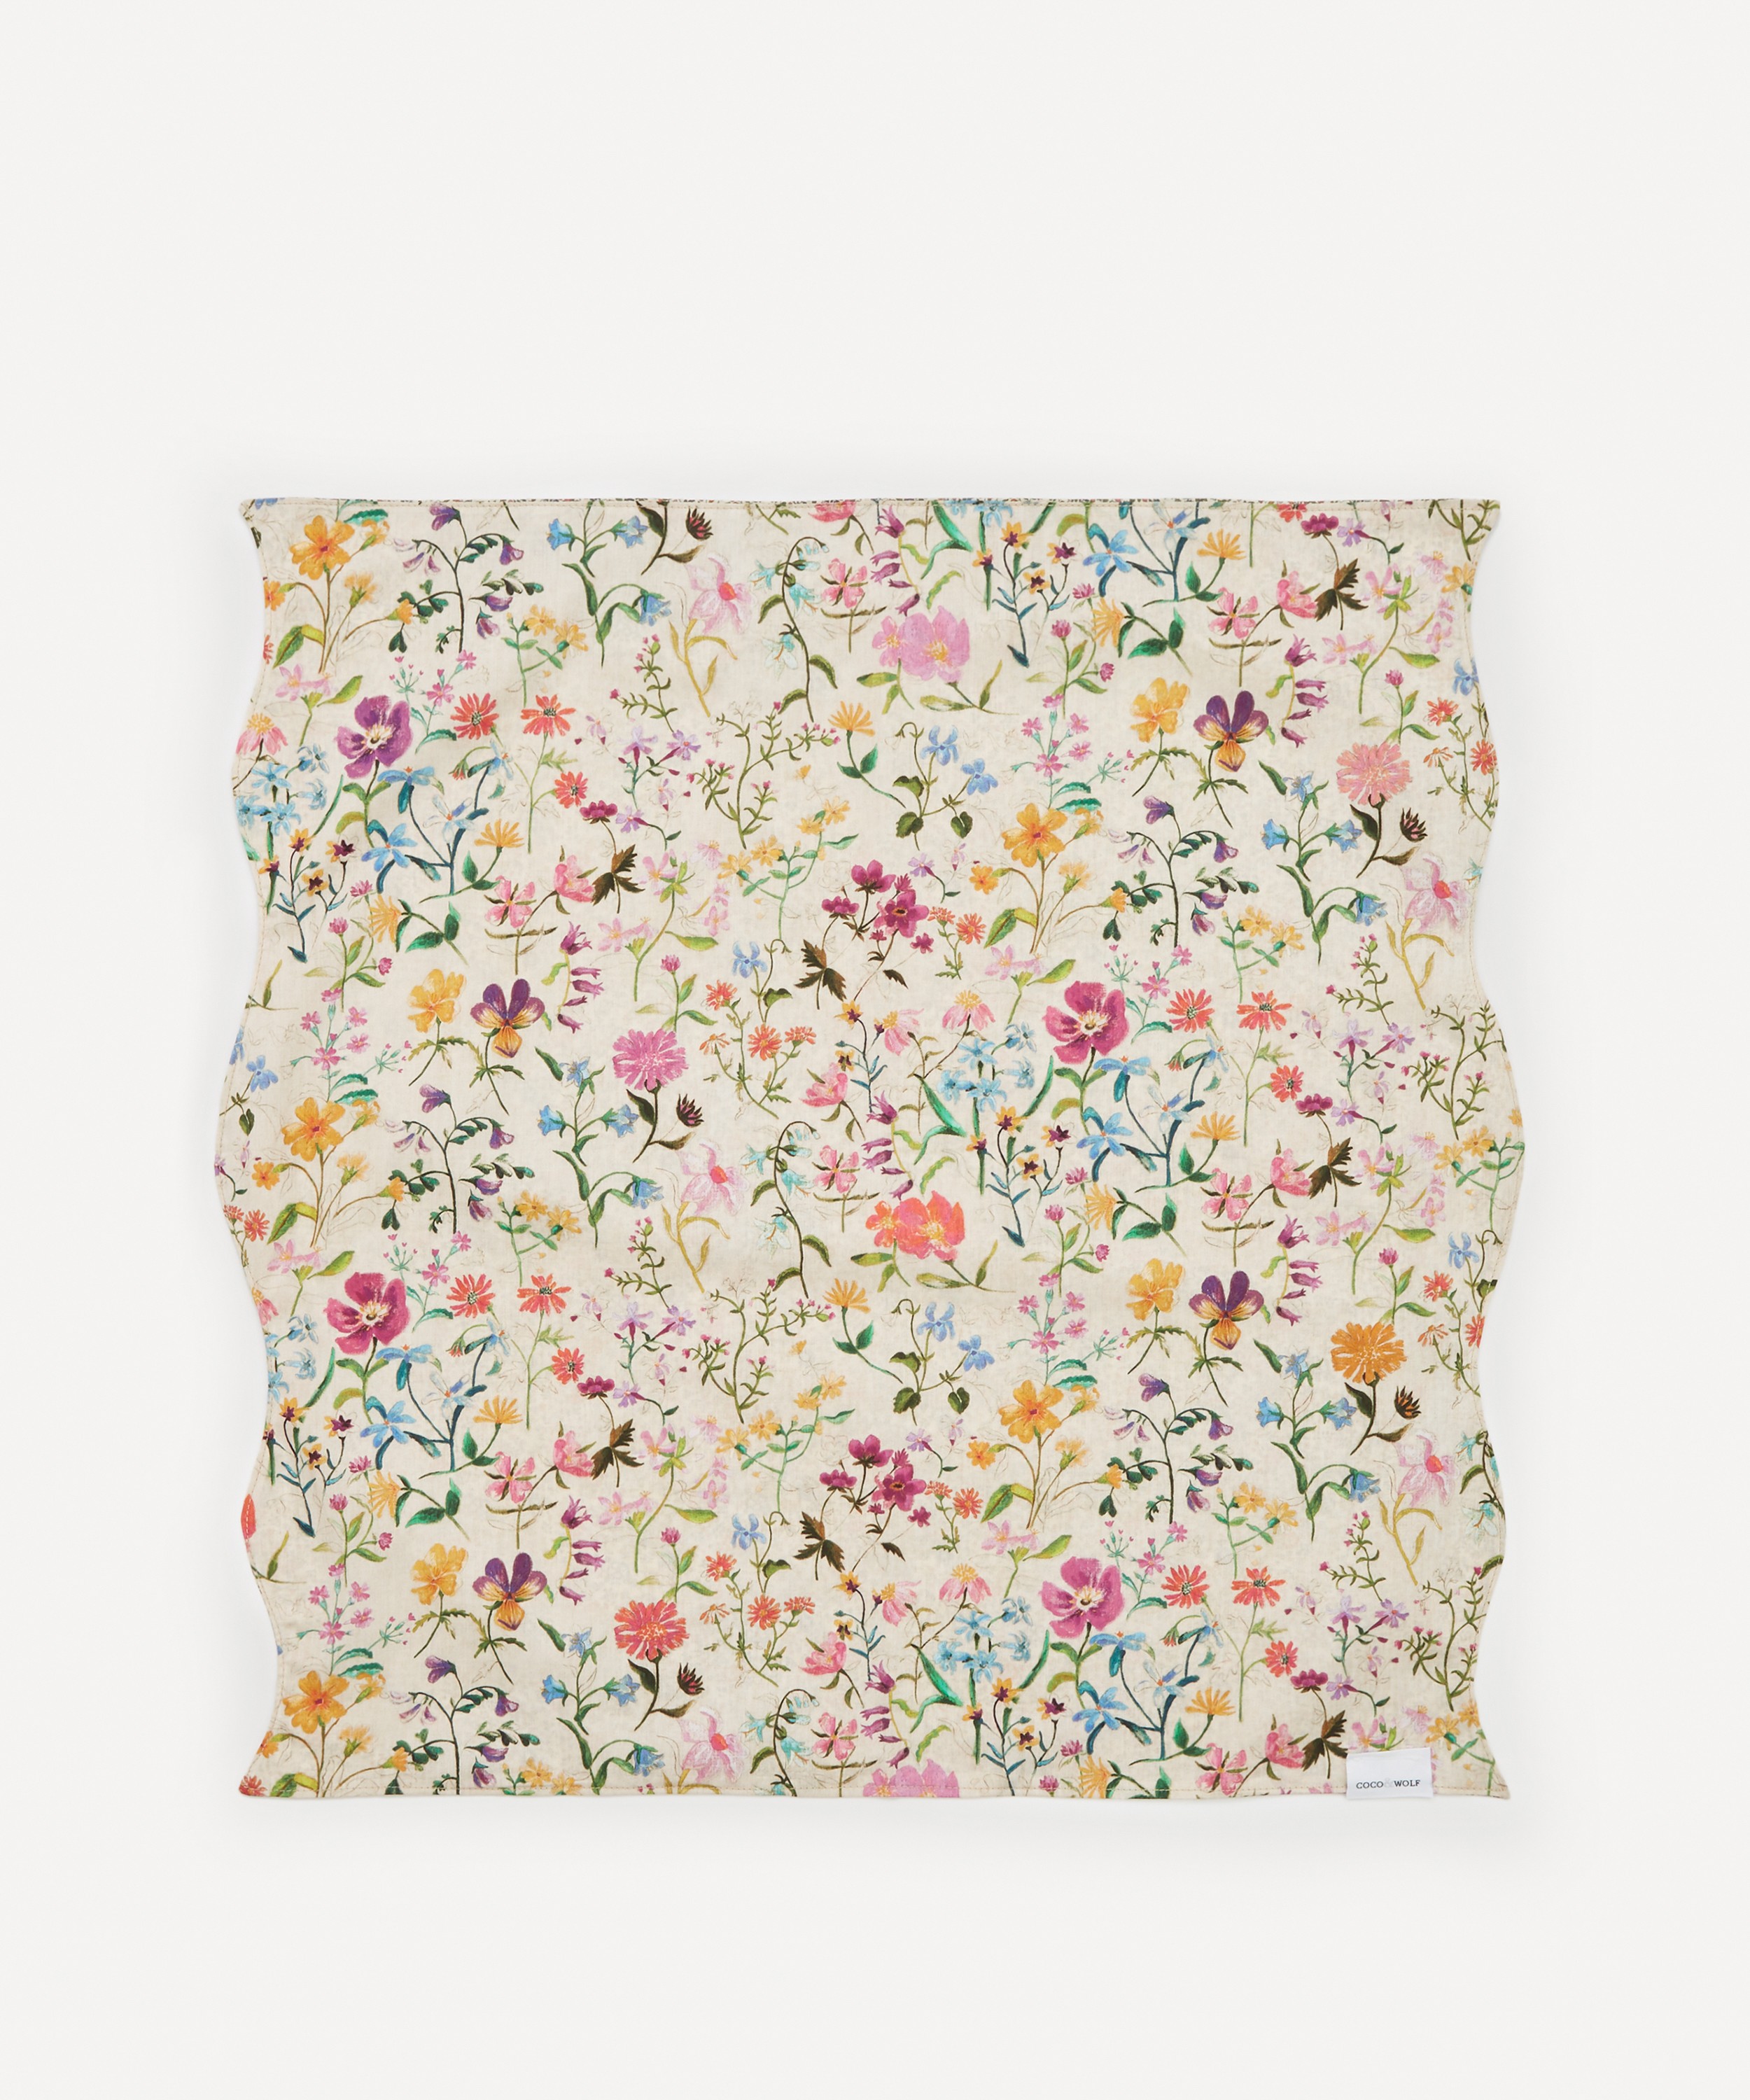 Coco & Wolf - Linen Garden and Katie and Millie Wavy Edge Napkins Set of Two image number 1